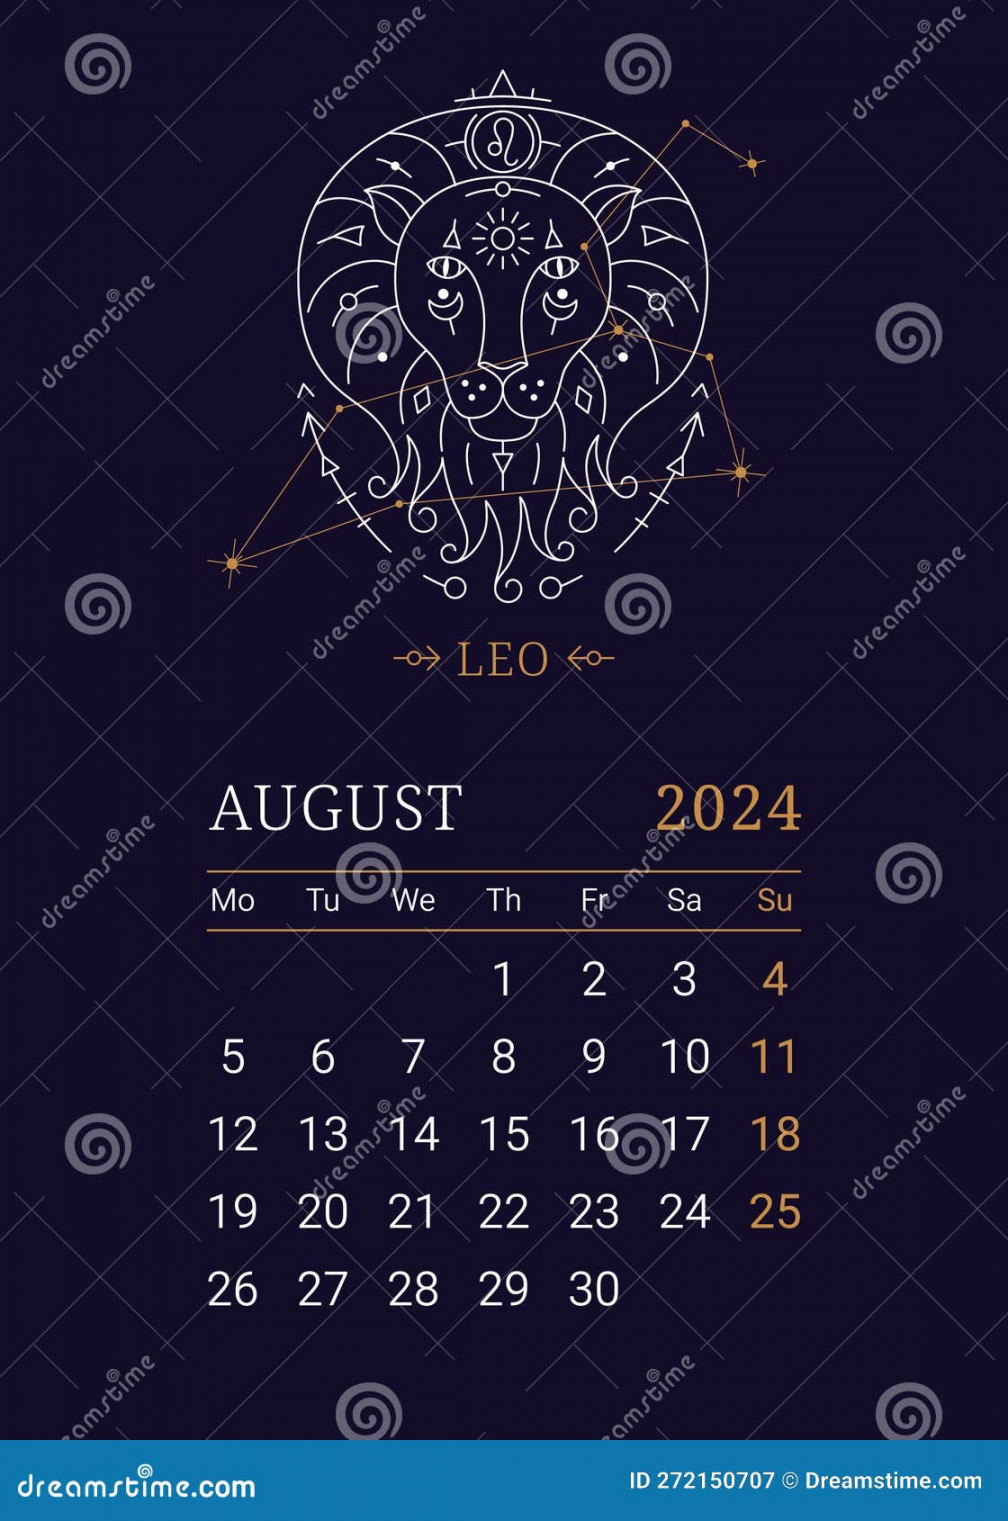 Astrology Wall Monthly Calendar with Leo Zodiac Sign Stock